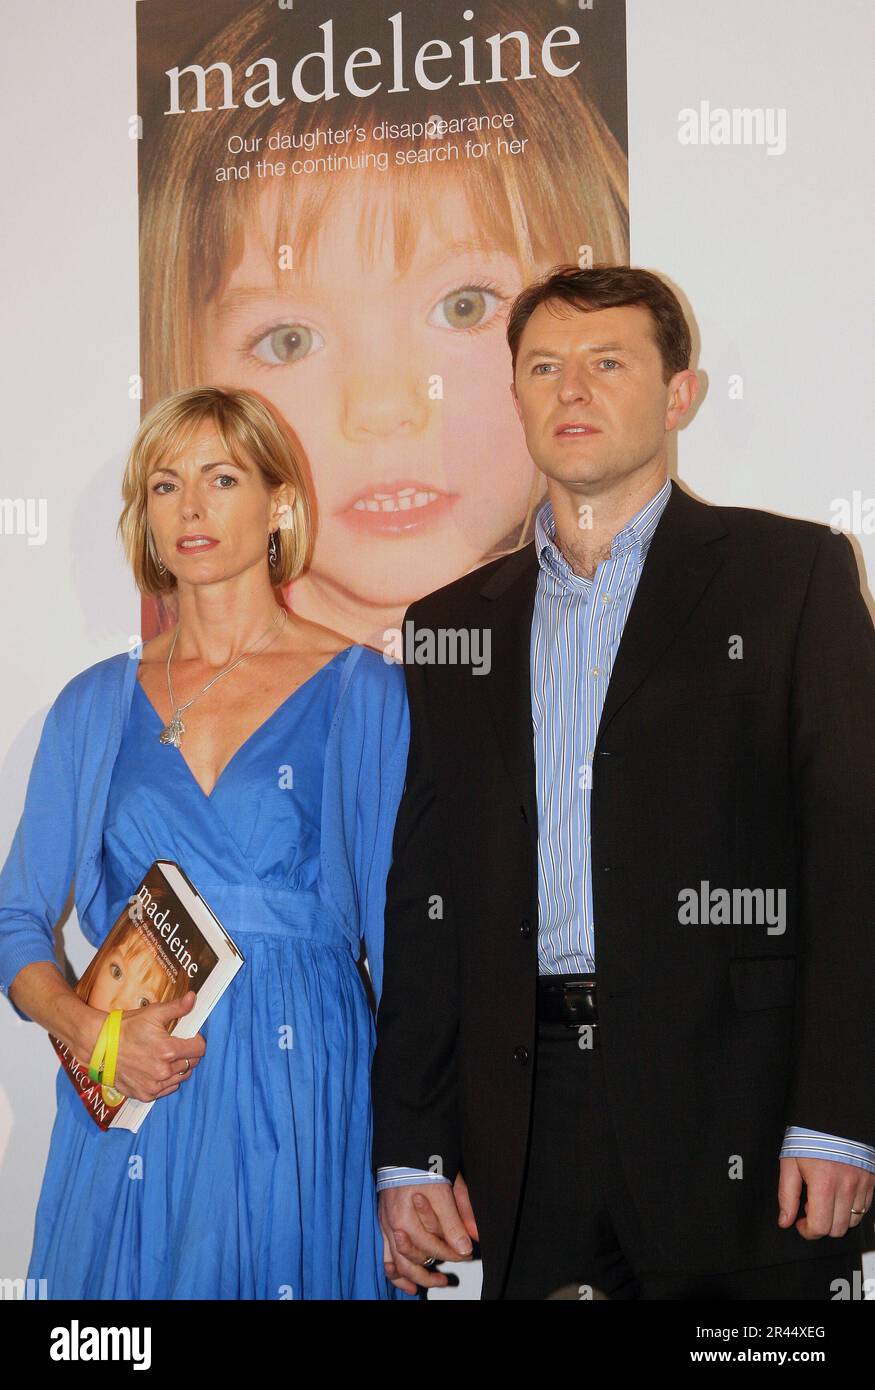 The parents of Madeleine, Kate and Gerry McCann launch their book 'Madeleine' in London on their daughter's 8th birthday. Stock Photo